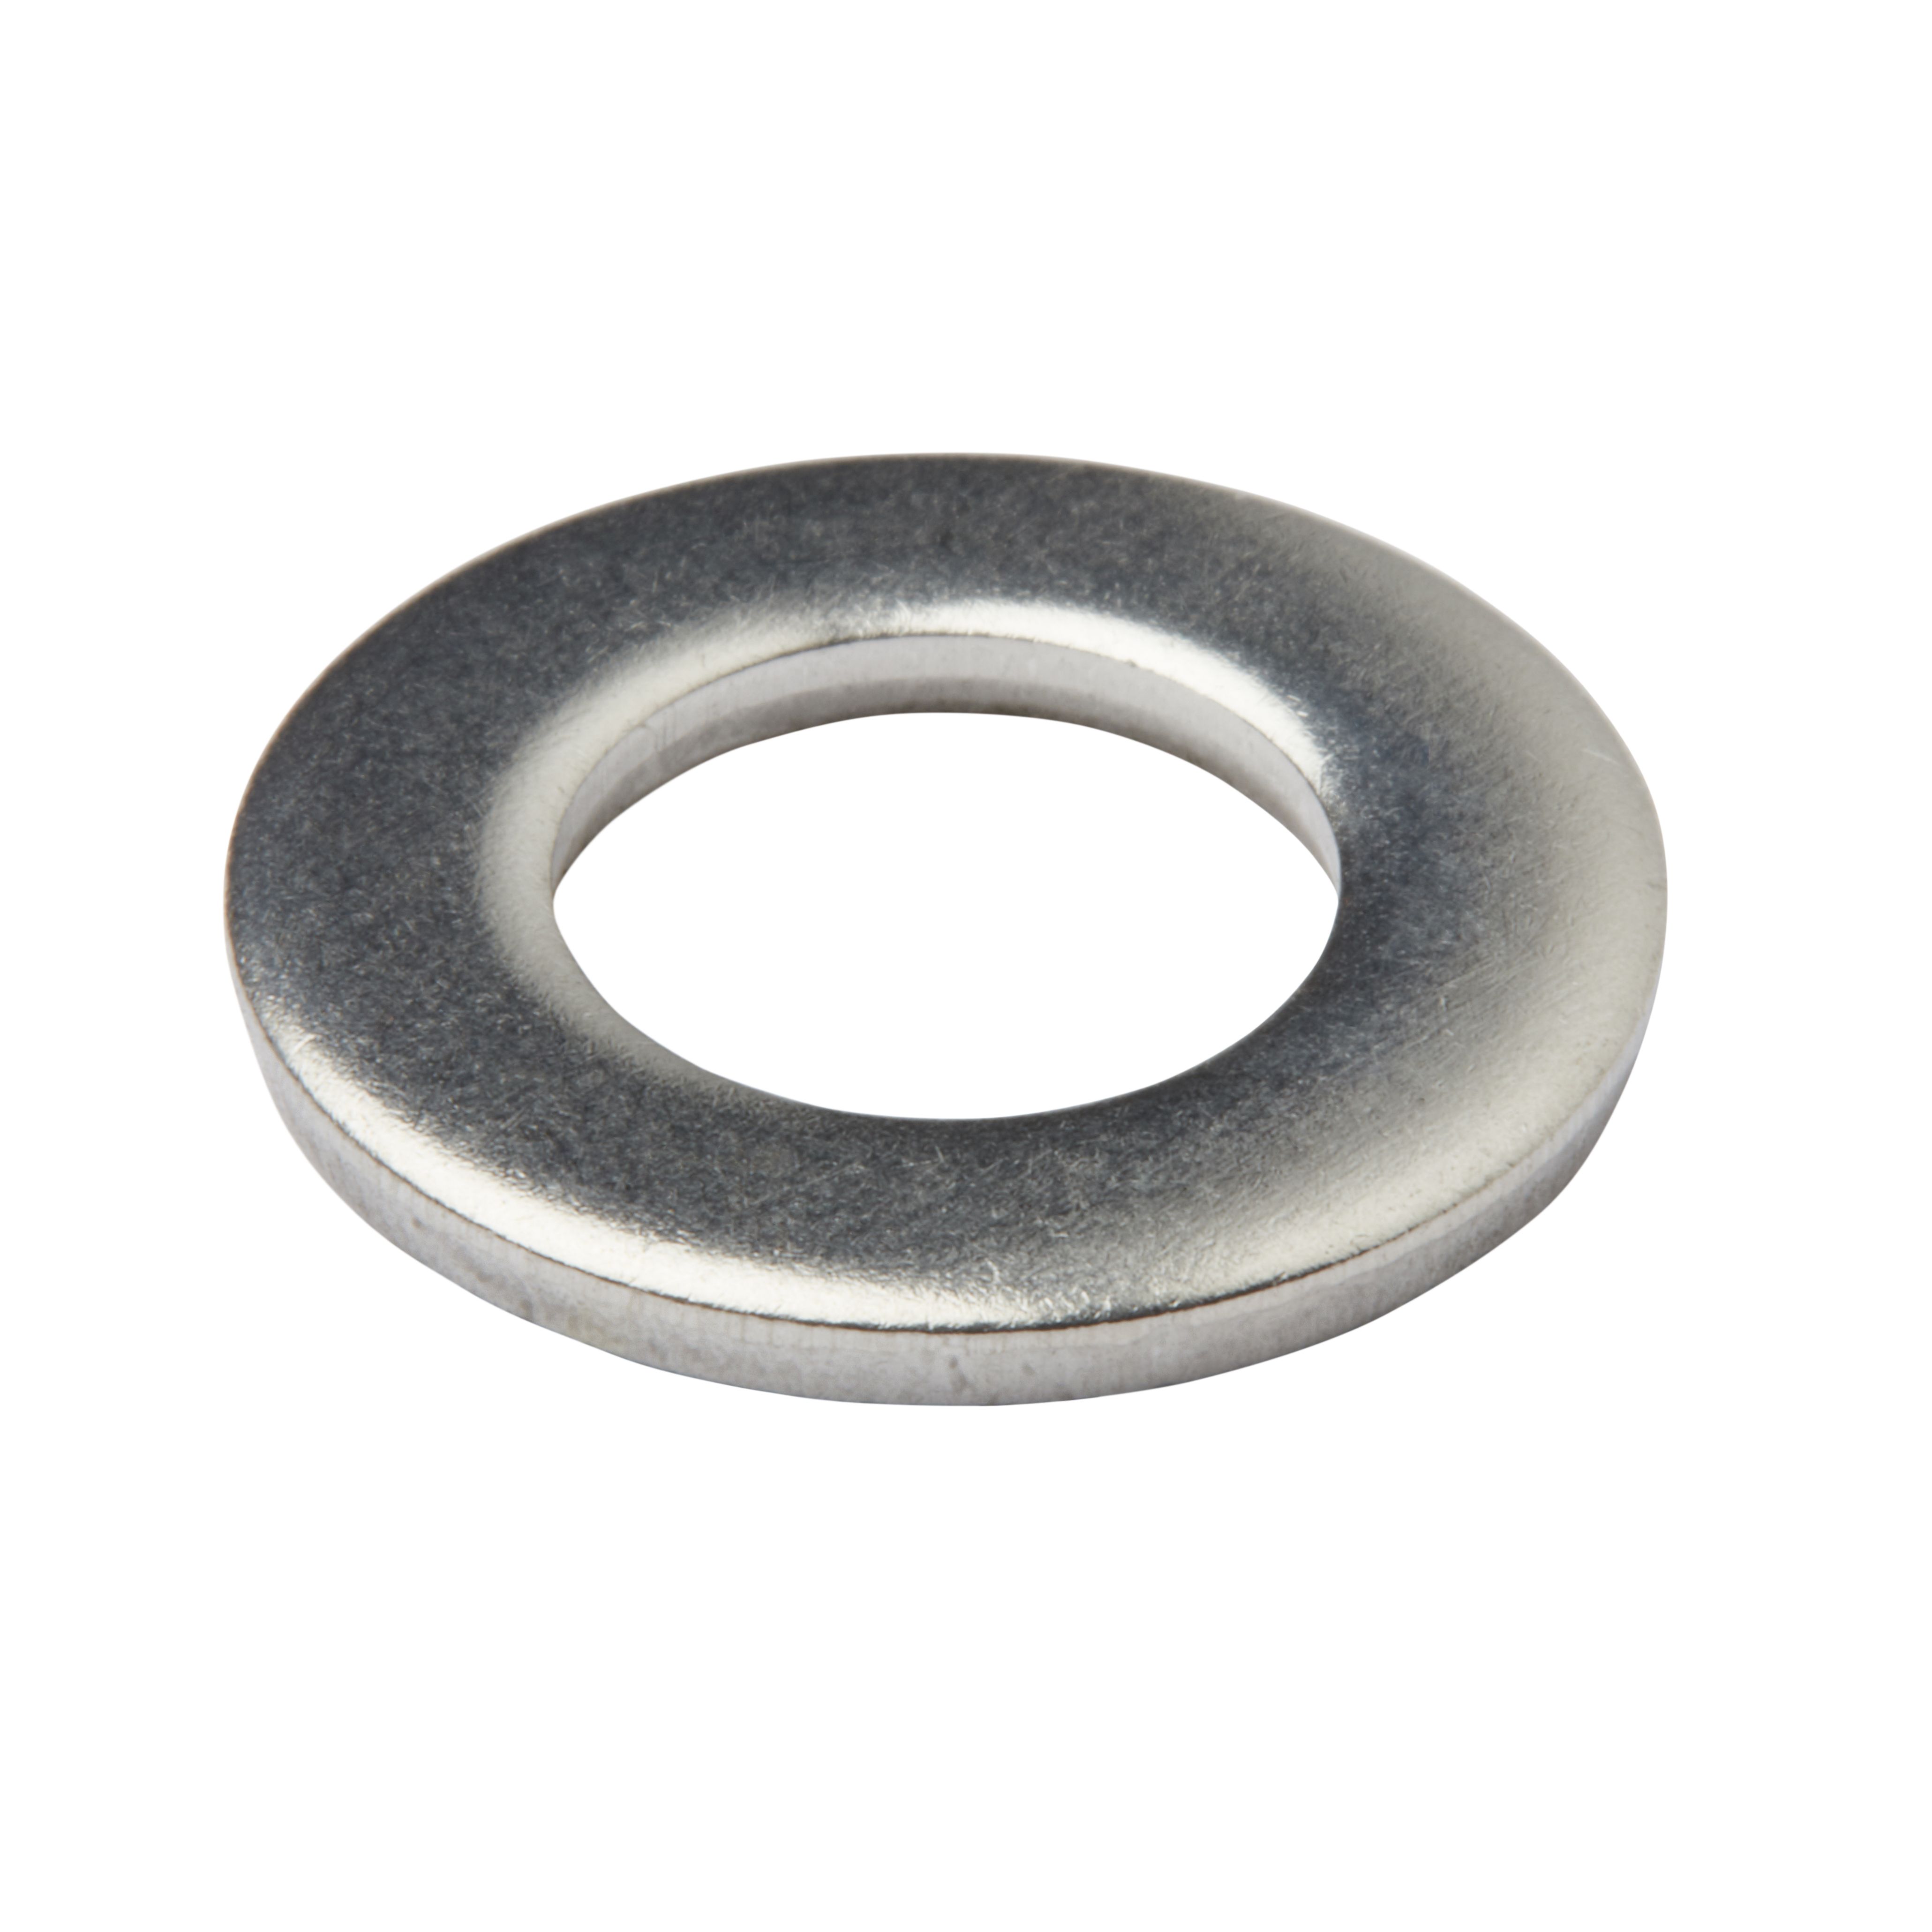 https://media.diy.com/is/image/Kingfisher/diall-m10-stainless-steel-medium-flat-washer-dia-10mm-pack-of-10~3663602753681_03bq?$MOB_PREV$&$width=618&$height=618